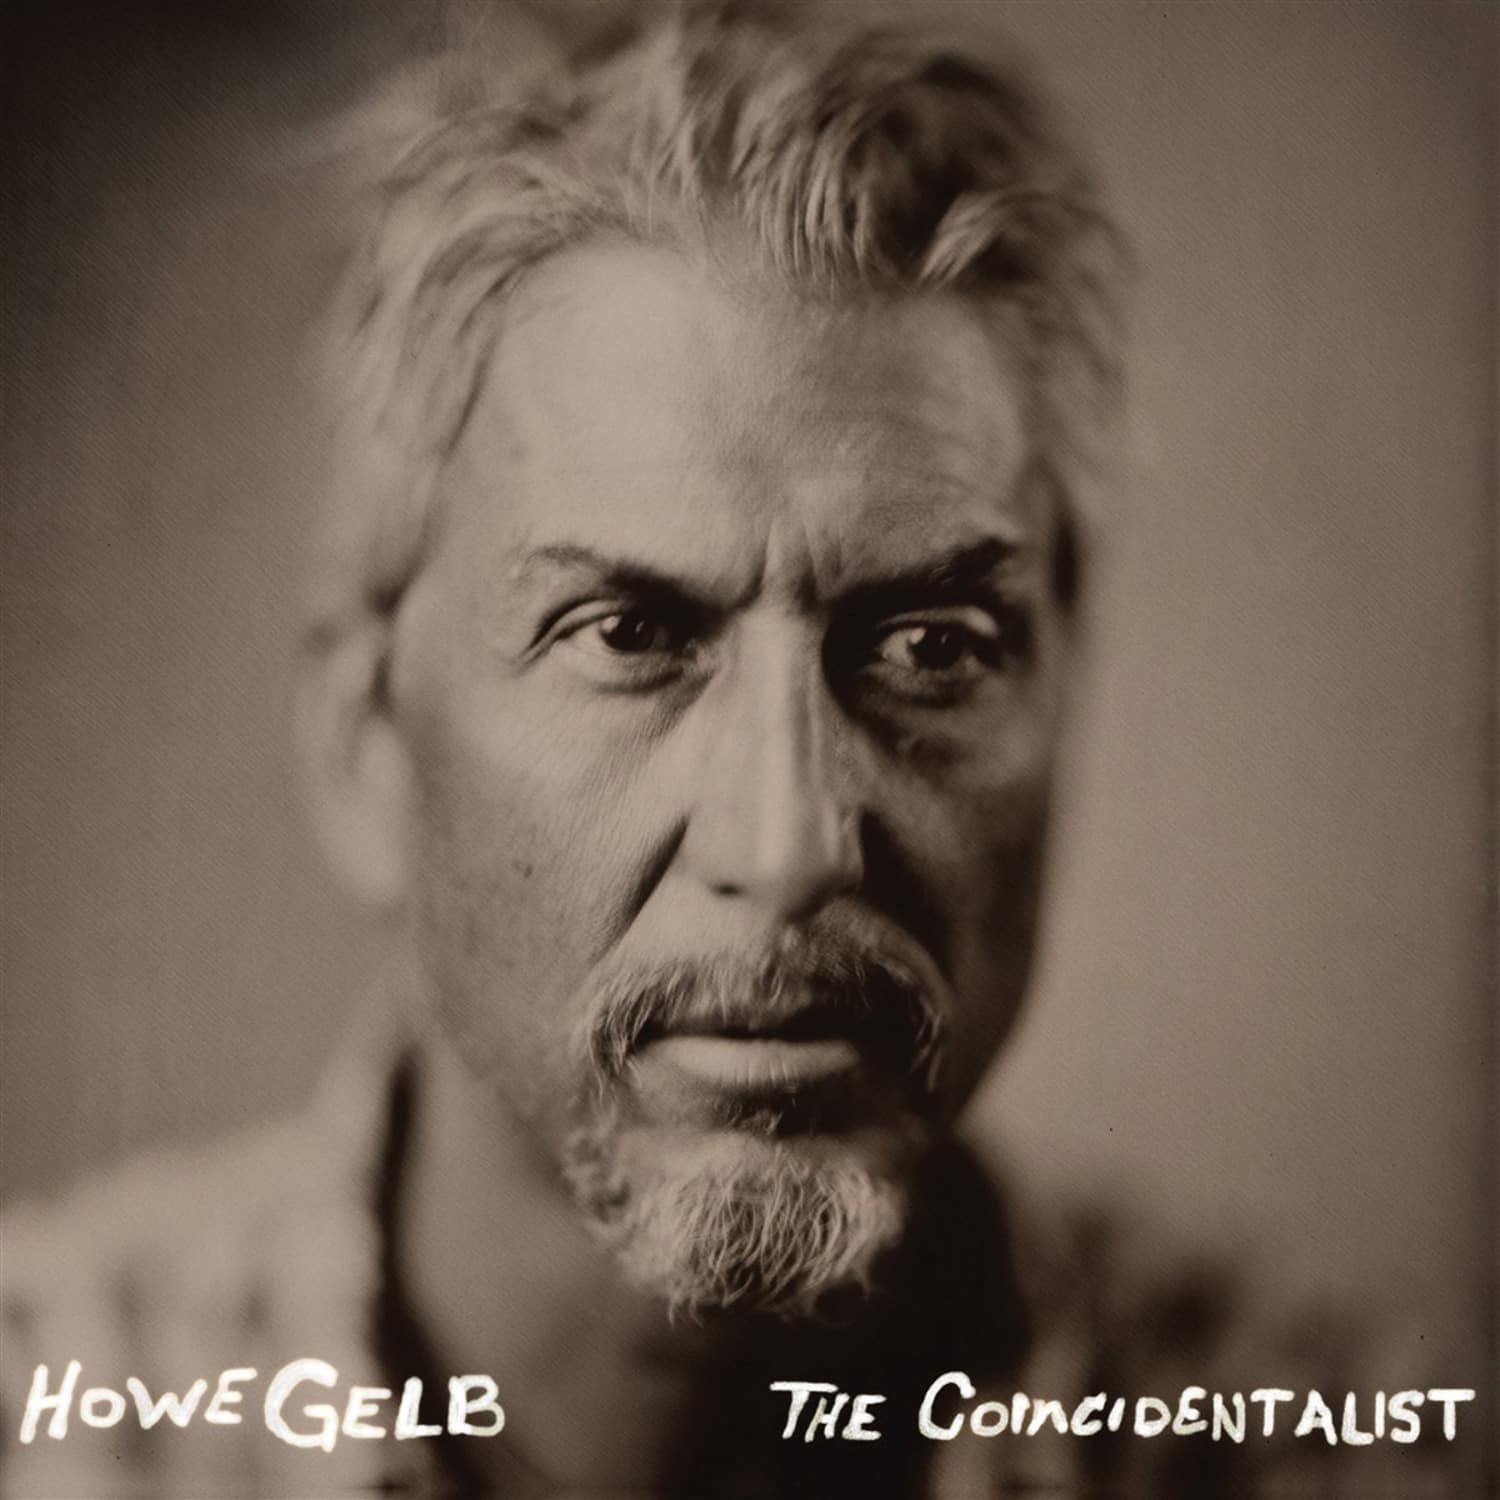 Howe Gelb - THE COINCIDENTALIST / DUSTY BOWL 